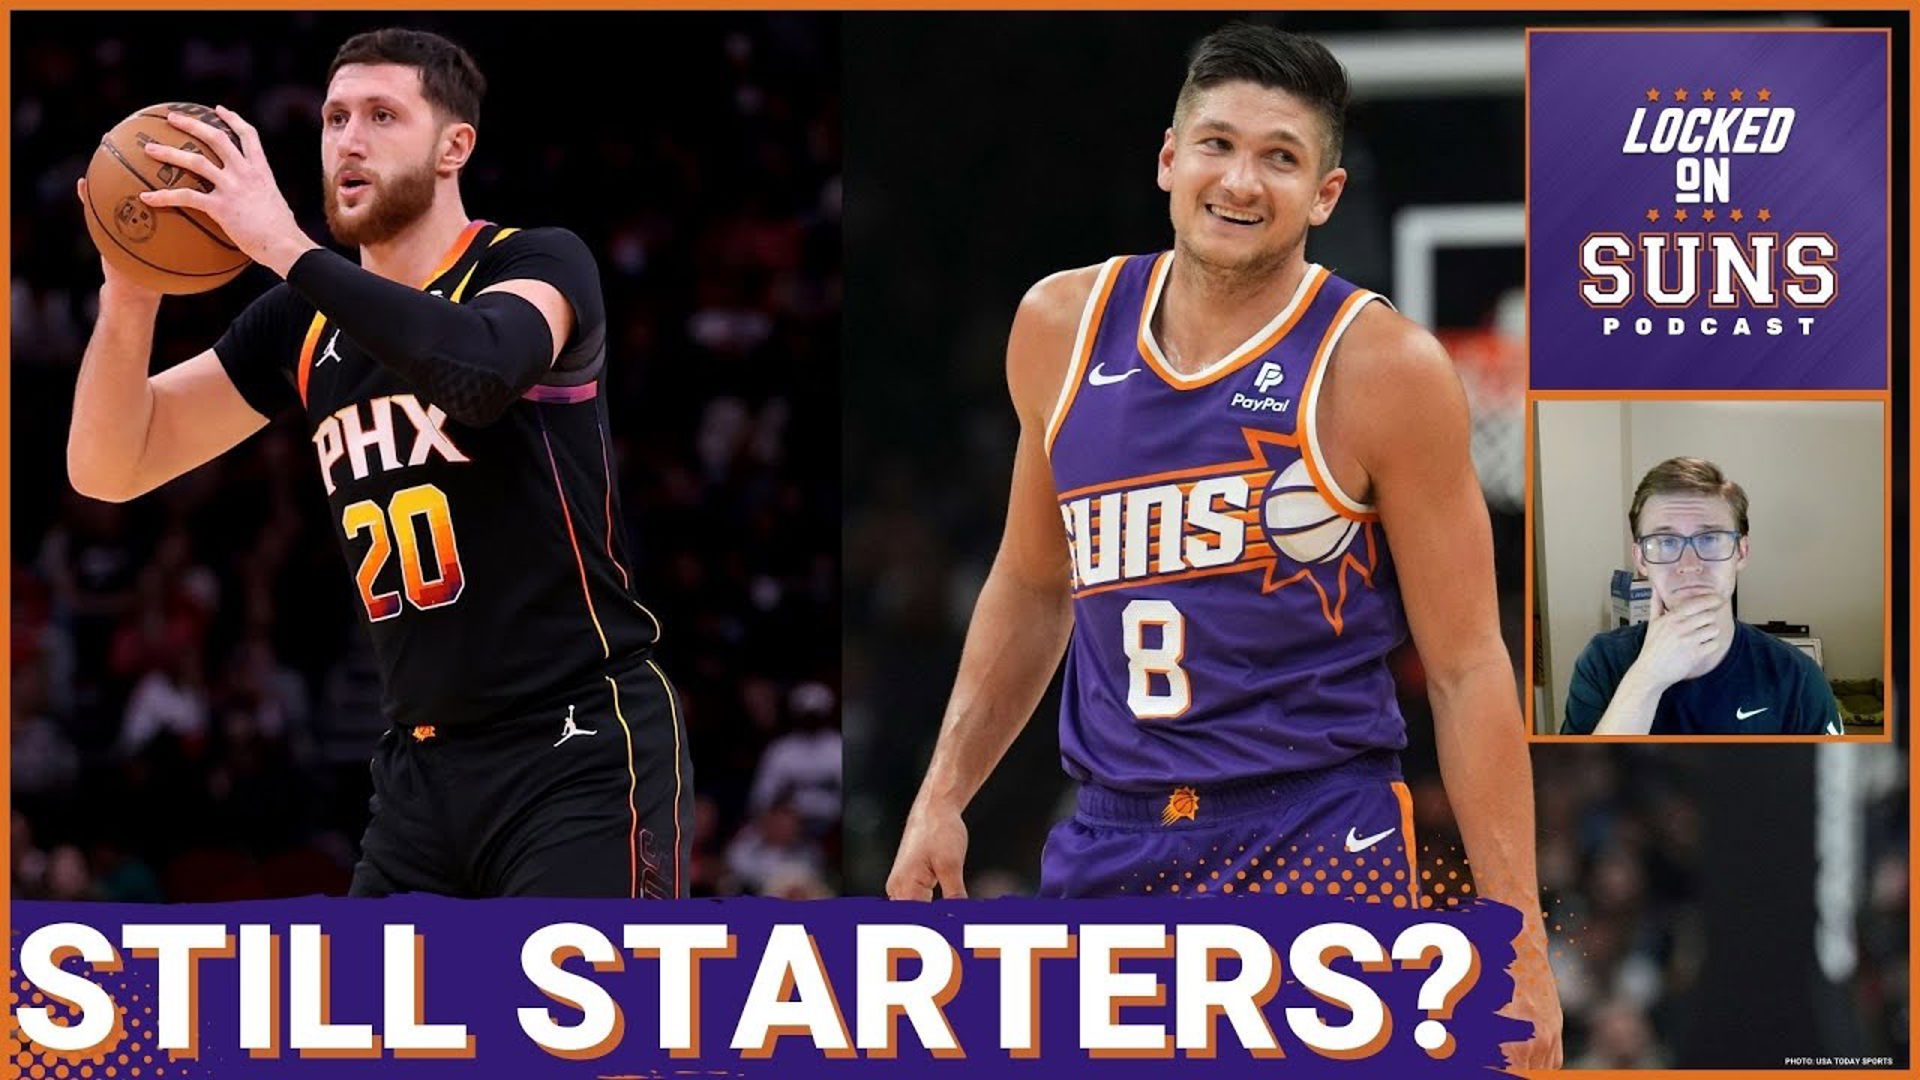 Jusuf Nurkic and Grayson Allen played well for the Phoenix Suns last season but still don't fit perfectly with the Big 3.